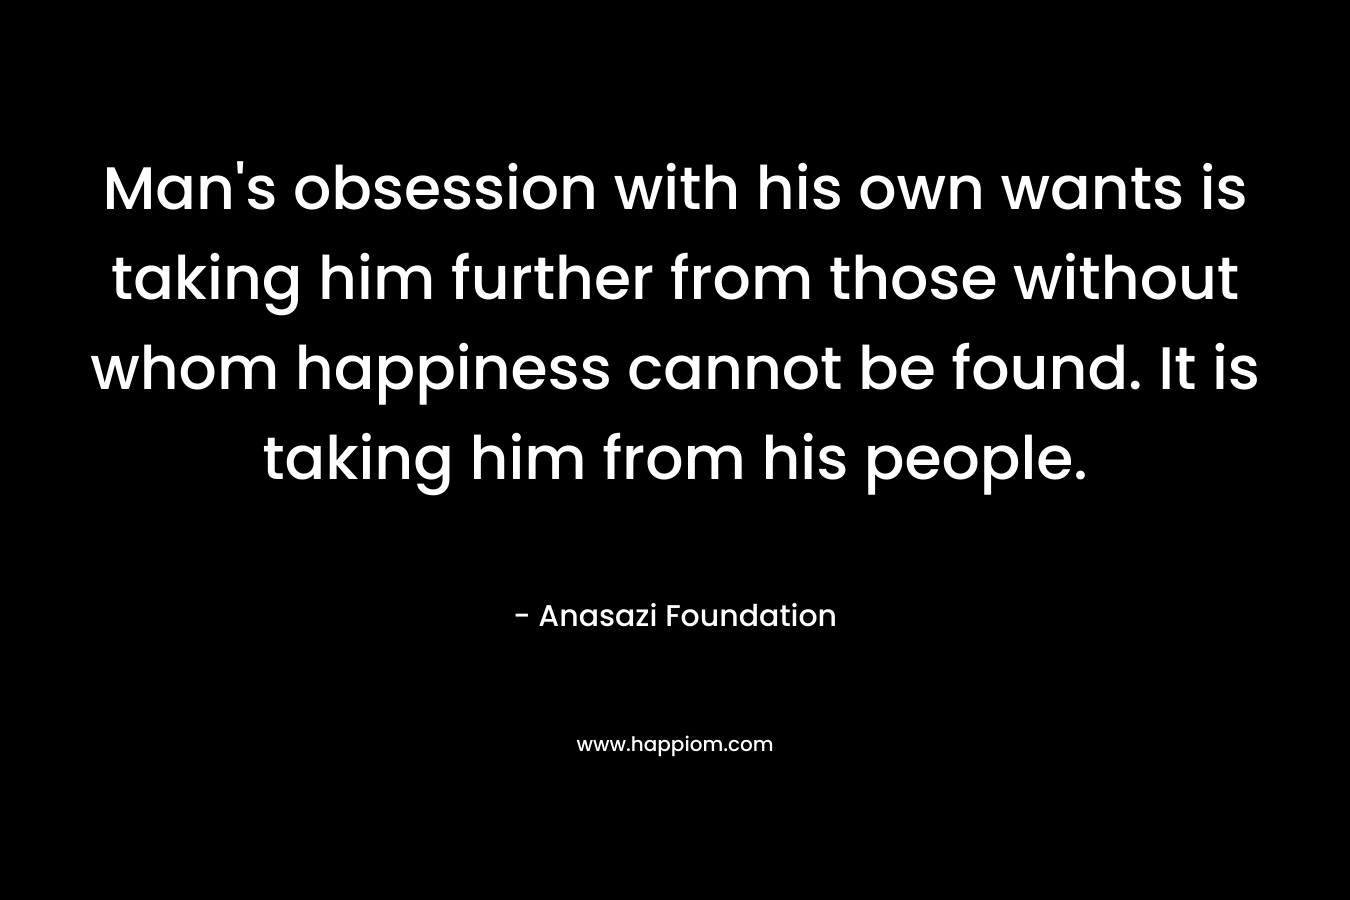 Man’s obsession with his own wants is taking him further from those without whom happiness cannot be found. It is taking him from his people. – Anasazi Foundation